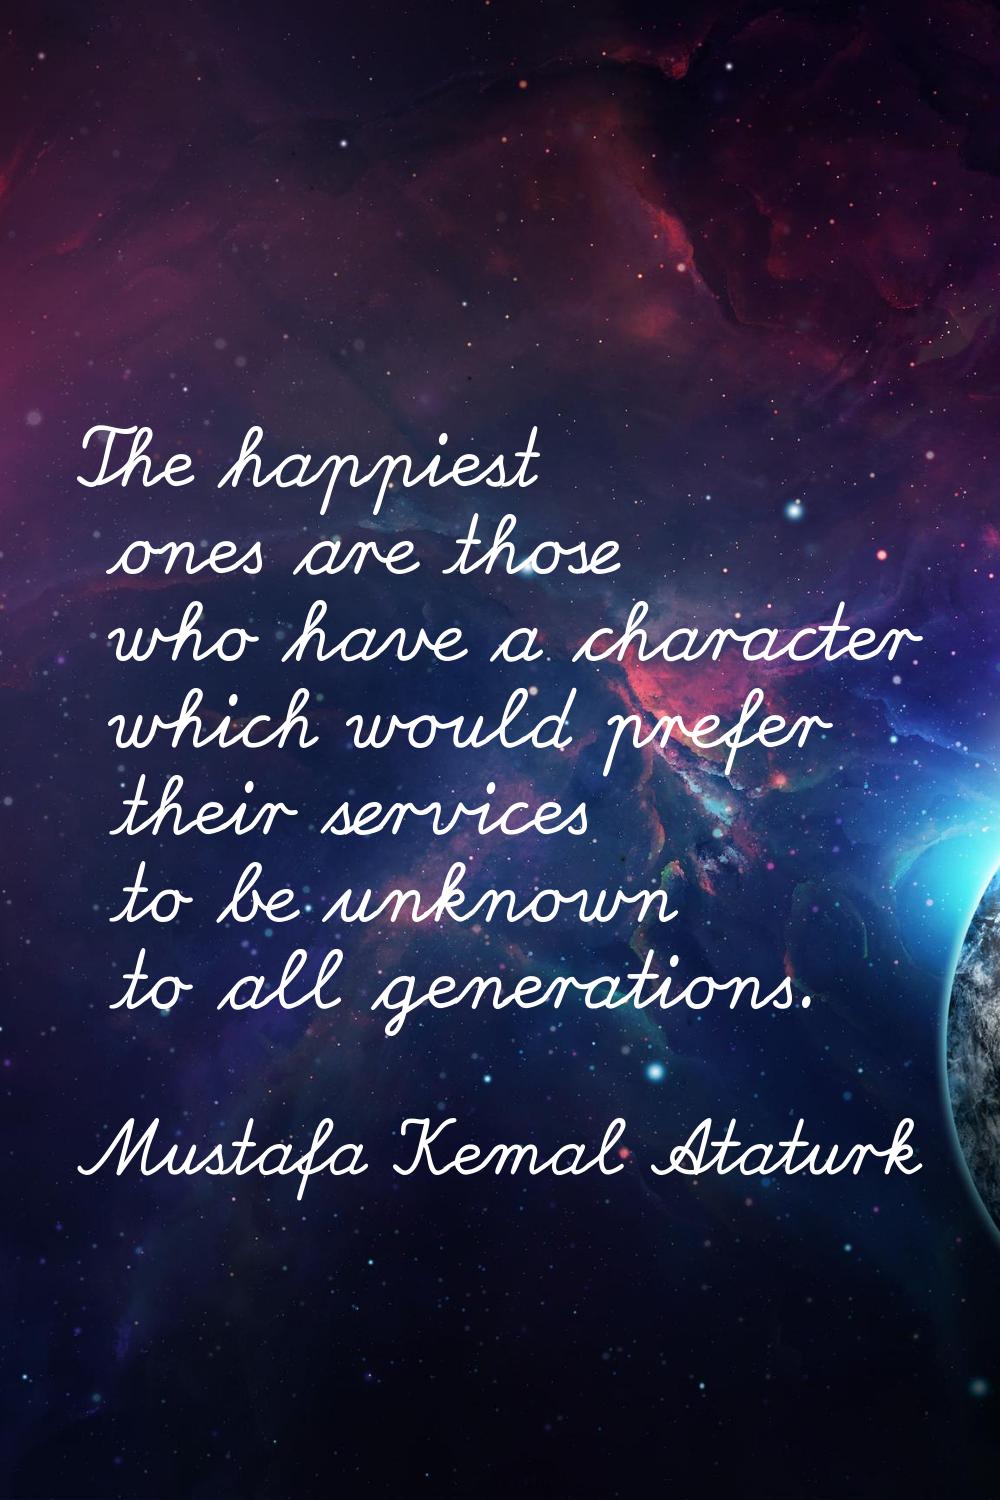 The happiest ones are those who have a character which would prefer their services to be unknown to